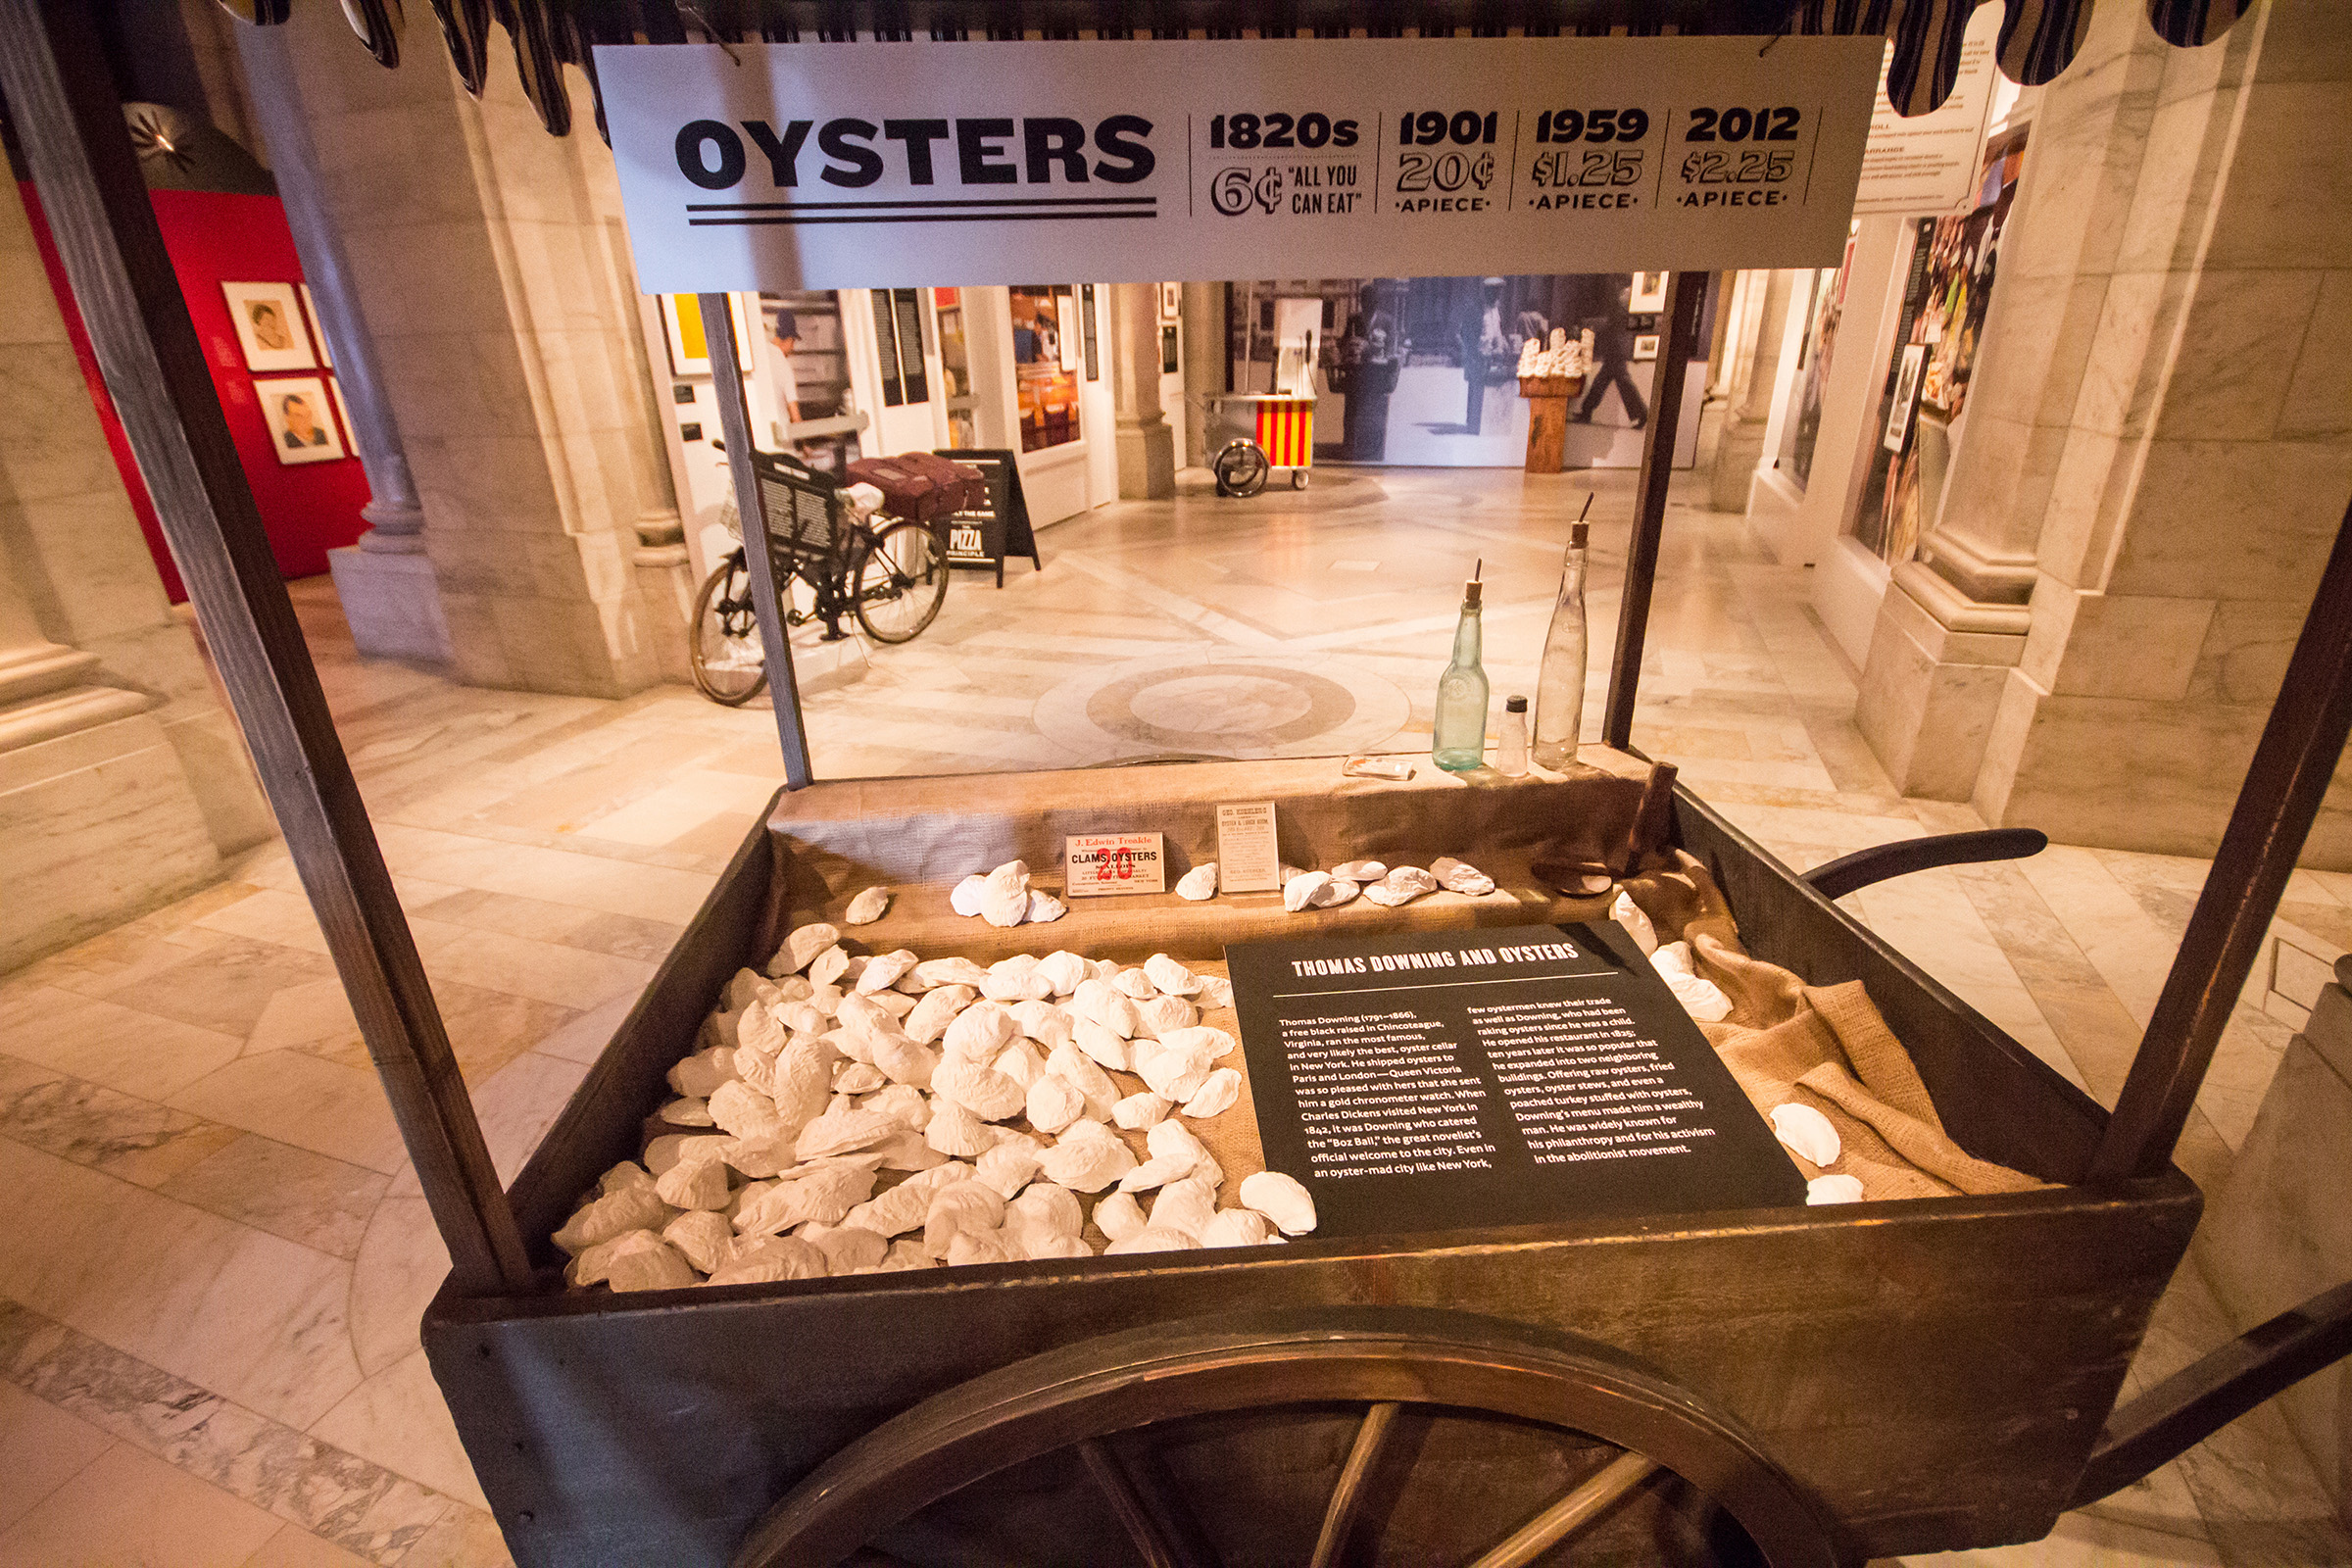 Lunch Hour Exhibition - A detail of the oyster cart showing casts of oyster shells, a brief text history, and a timeline of typical oyster prices.